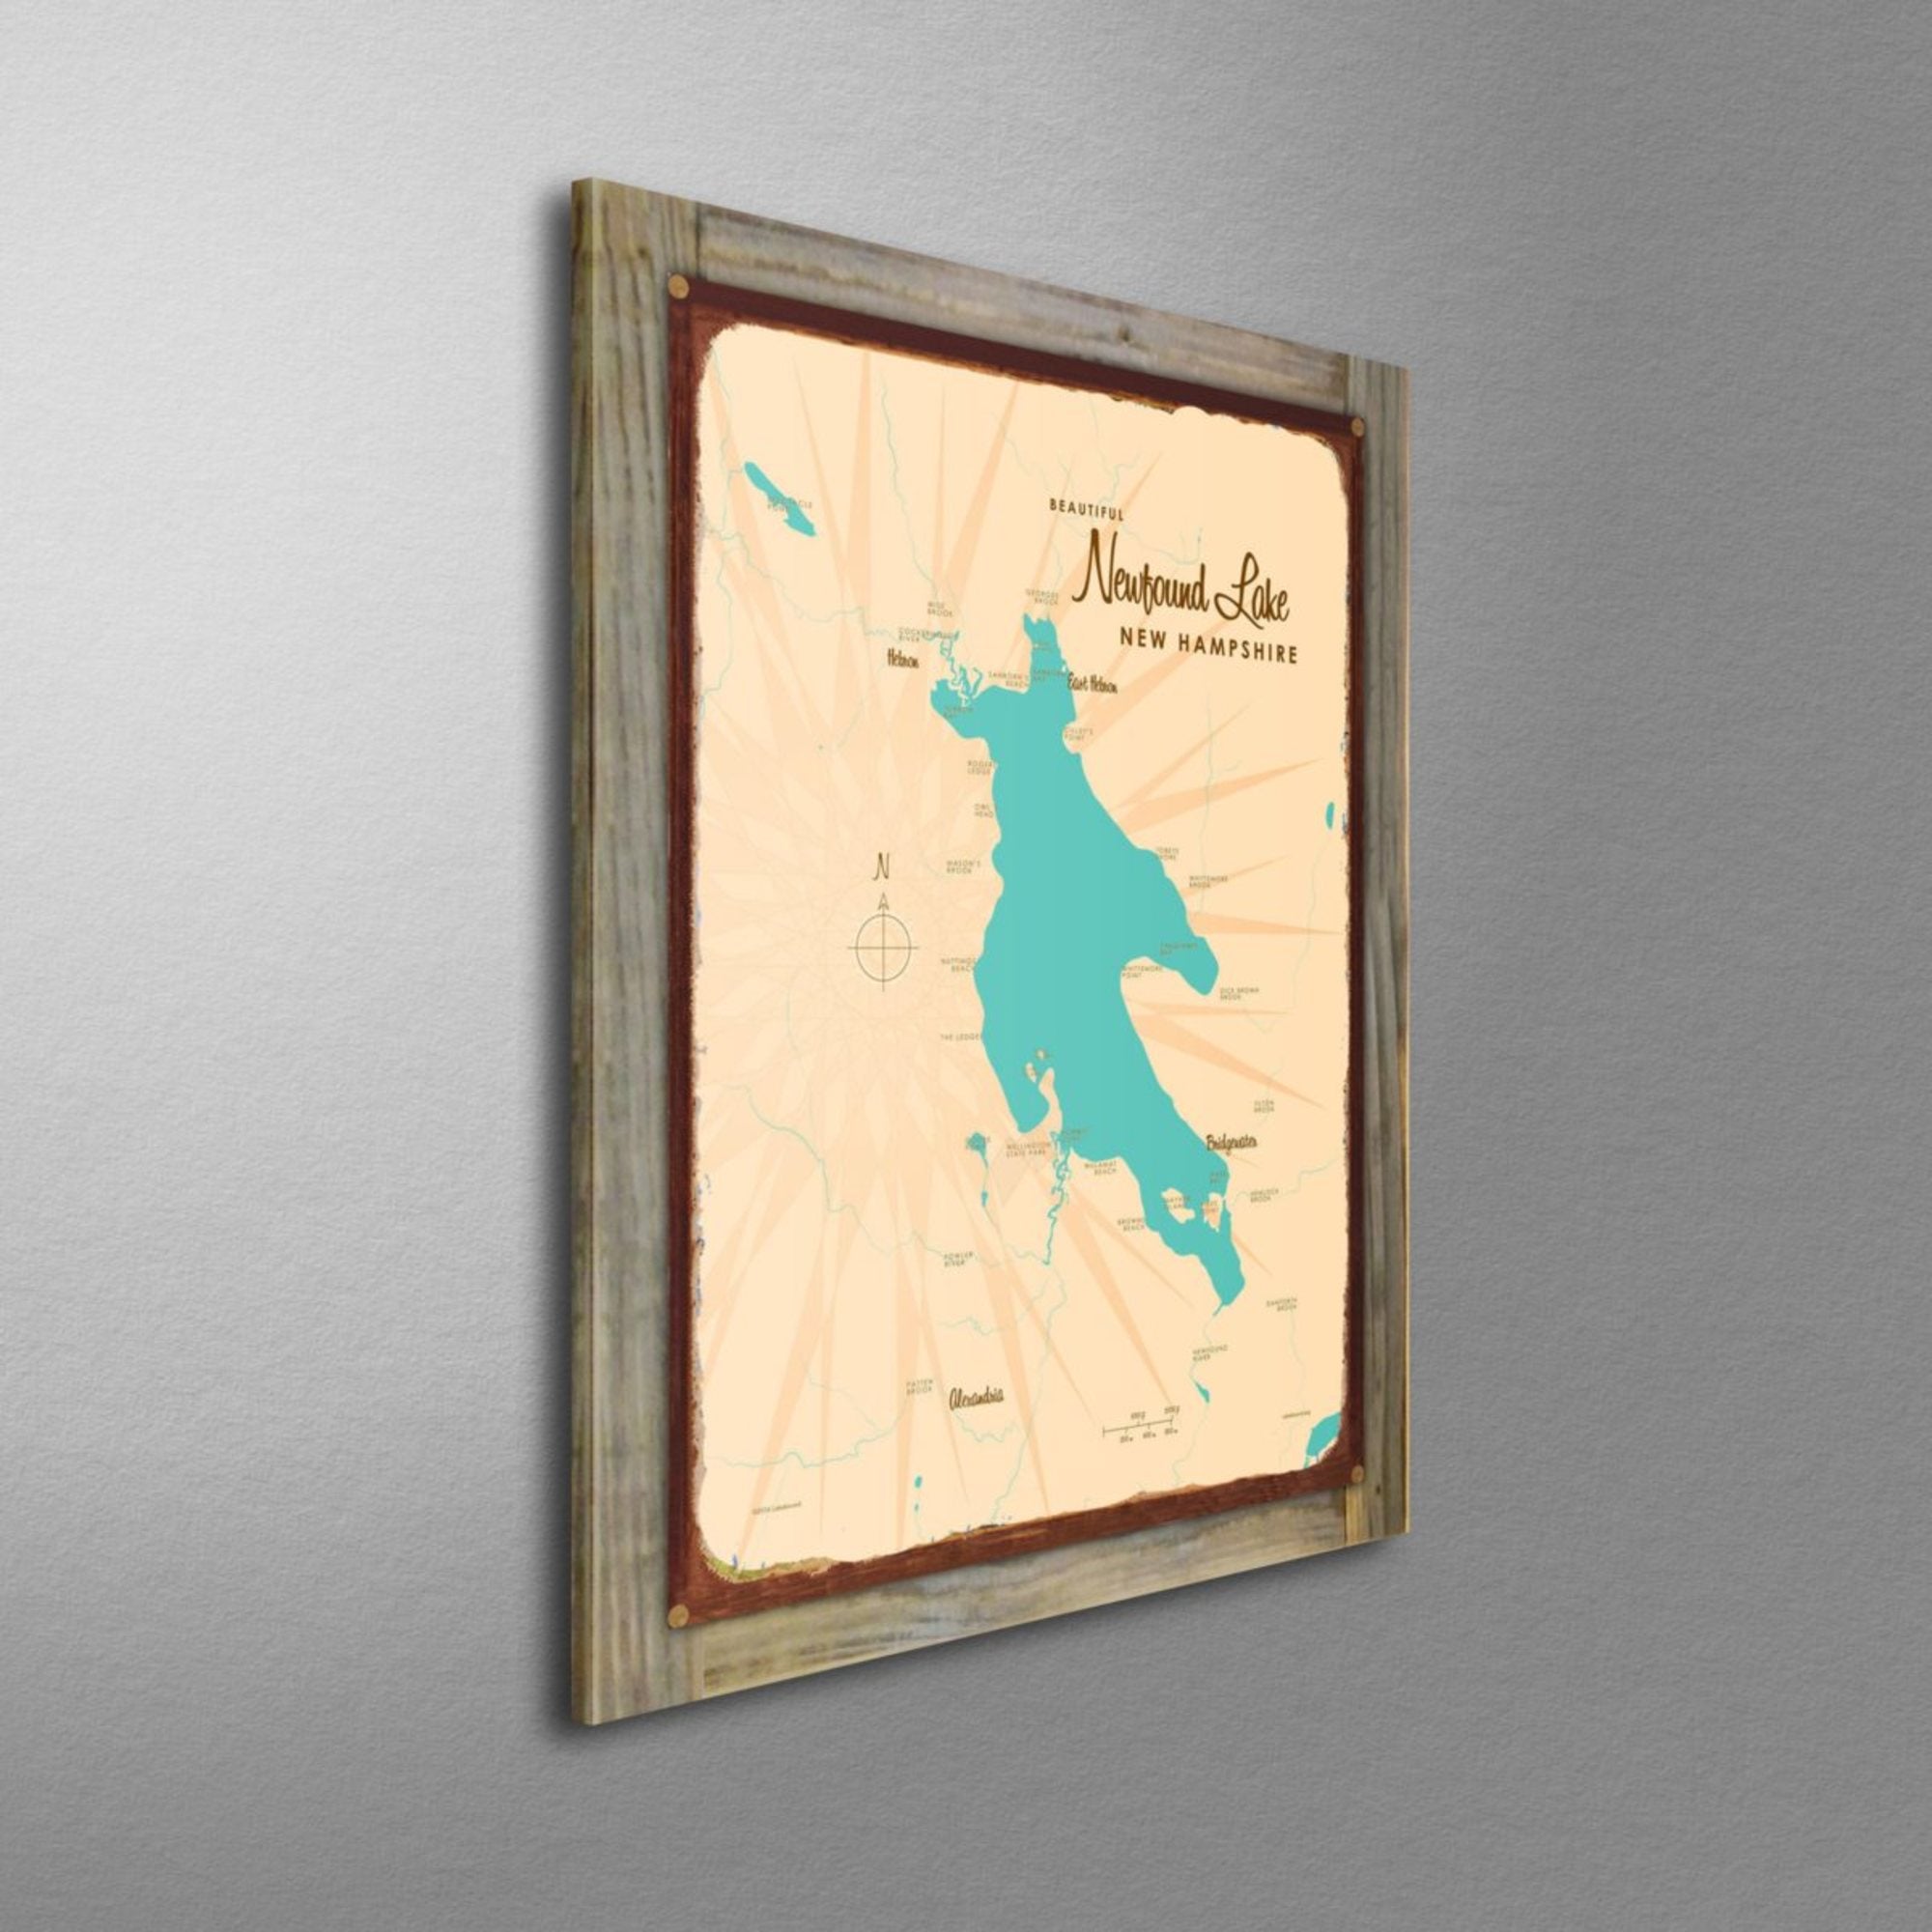 Newfound Lake New Hampshire, Wood-Mounted Rustic Metal Sign Map Art